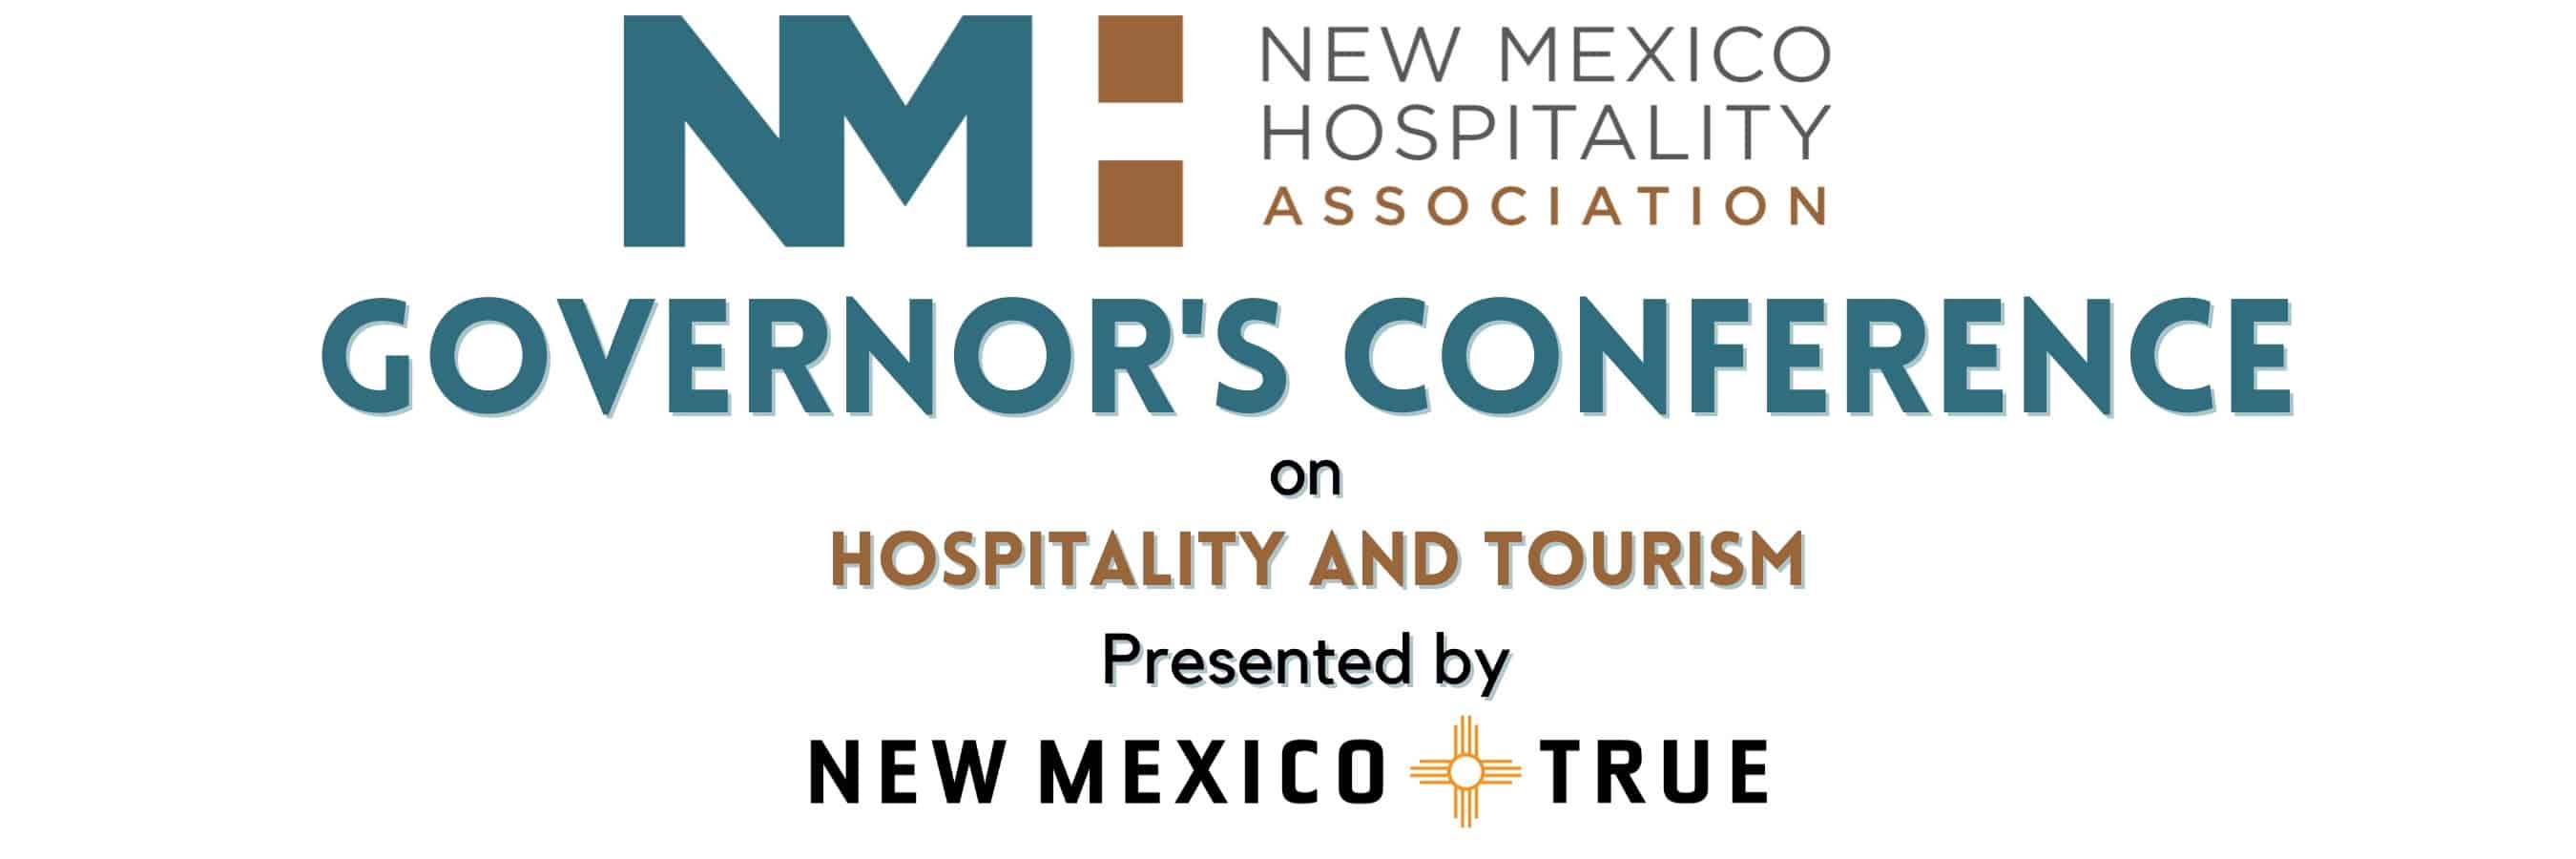 New Mexico Hospitality Association (NMHA) Governors Conference on Hospitality May 16-17, 2022 at the Albuqurque Convention Center